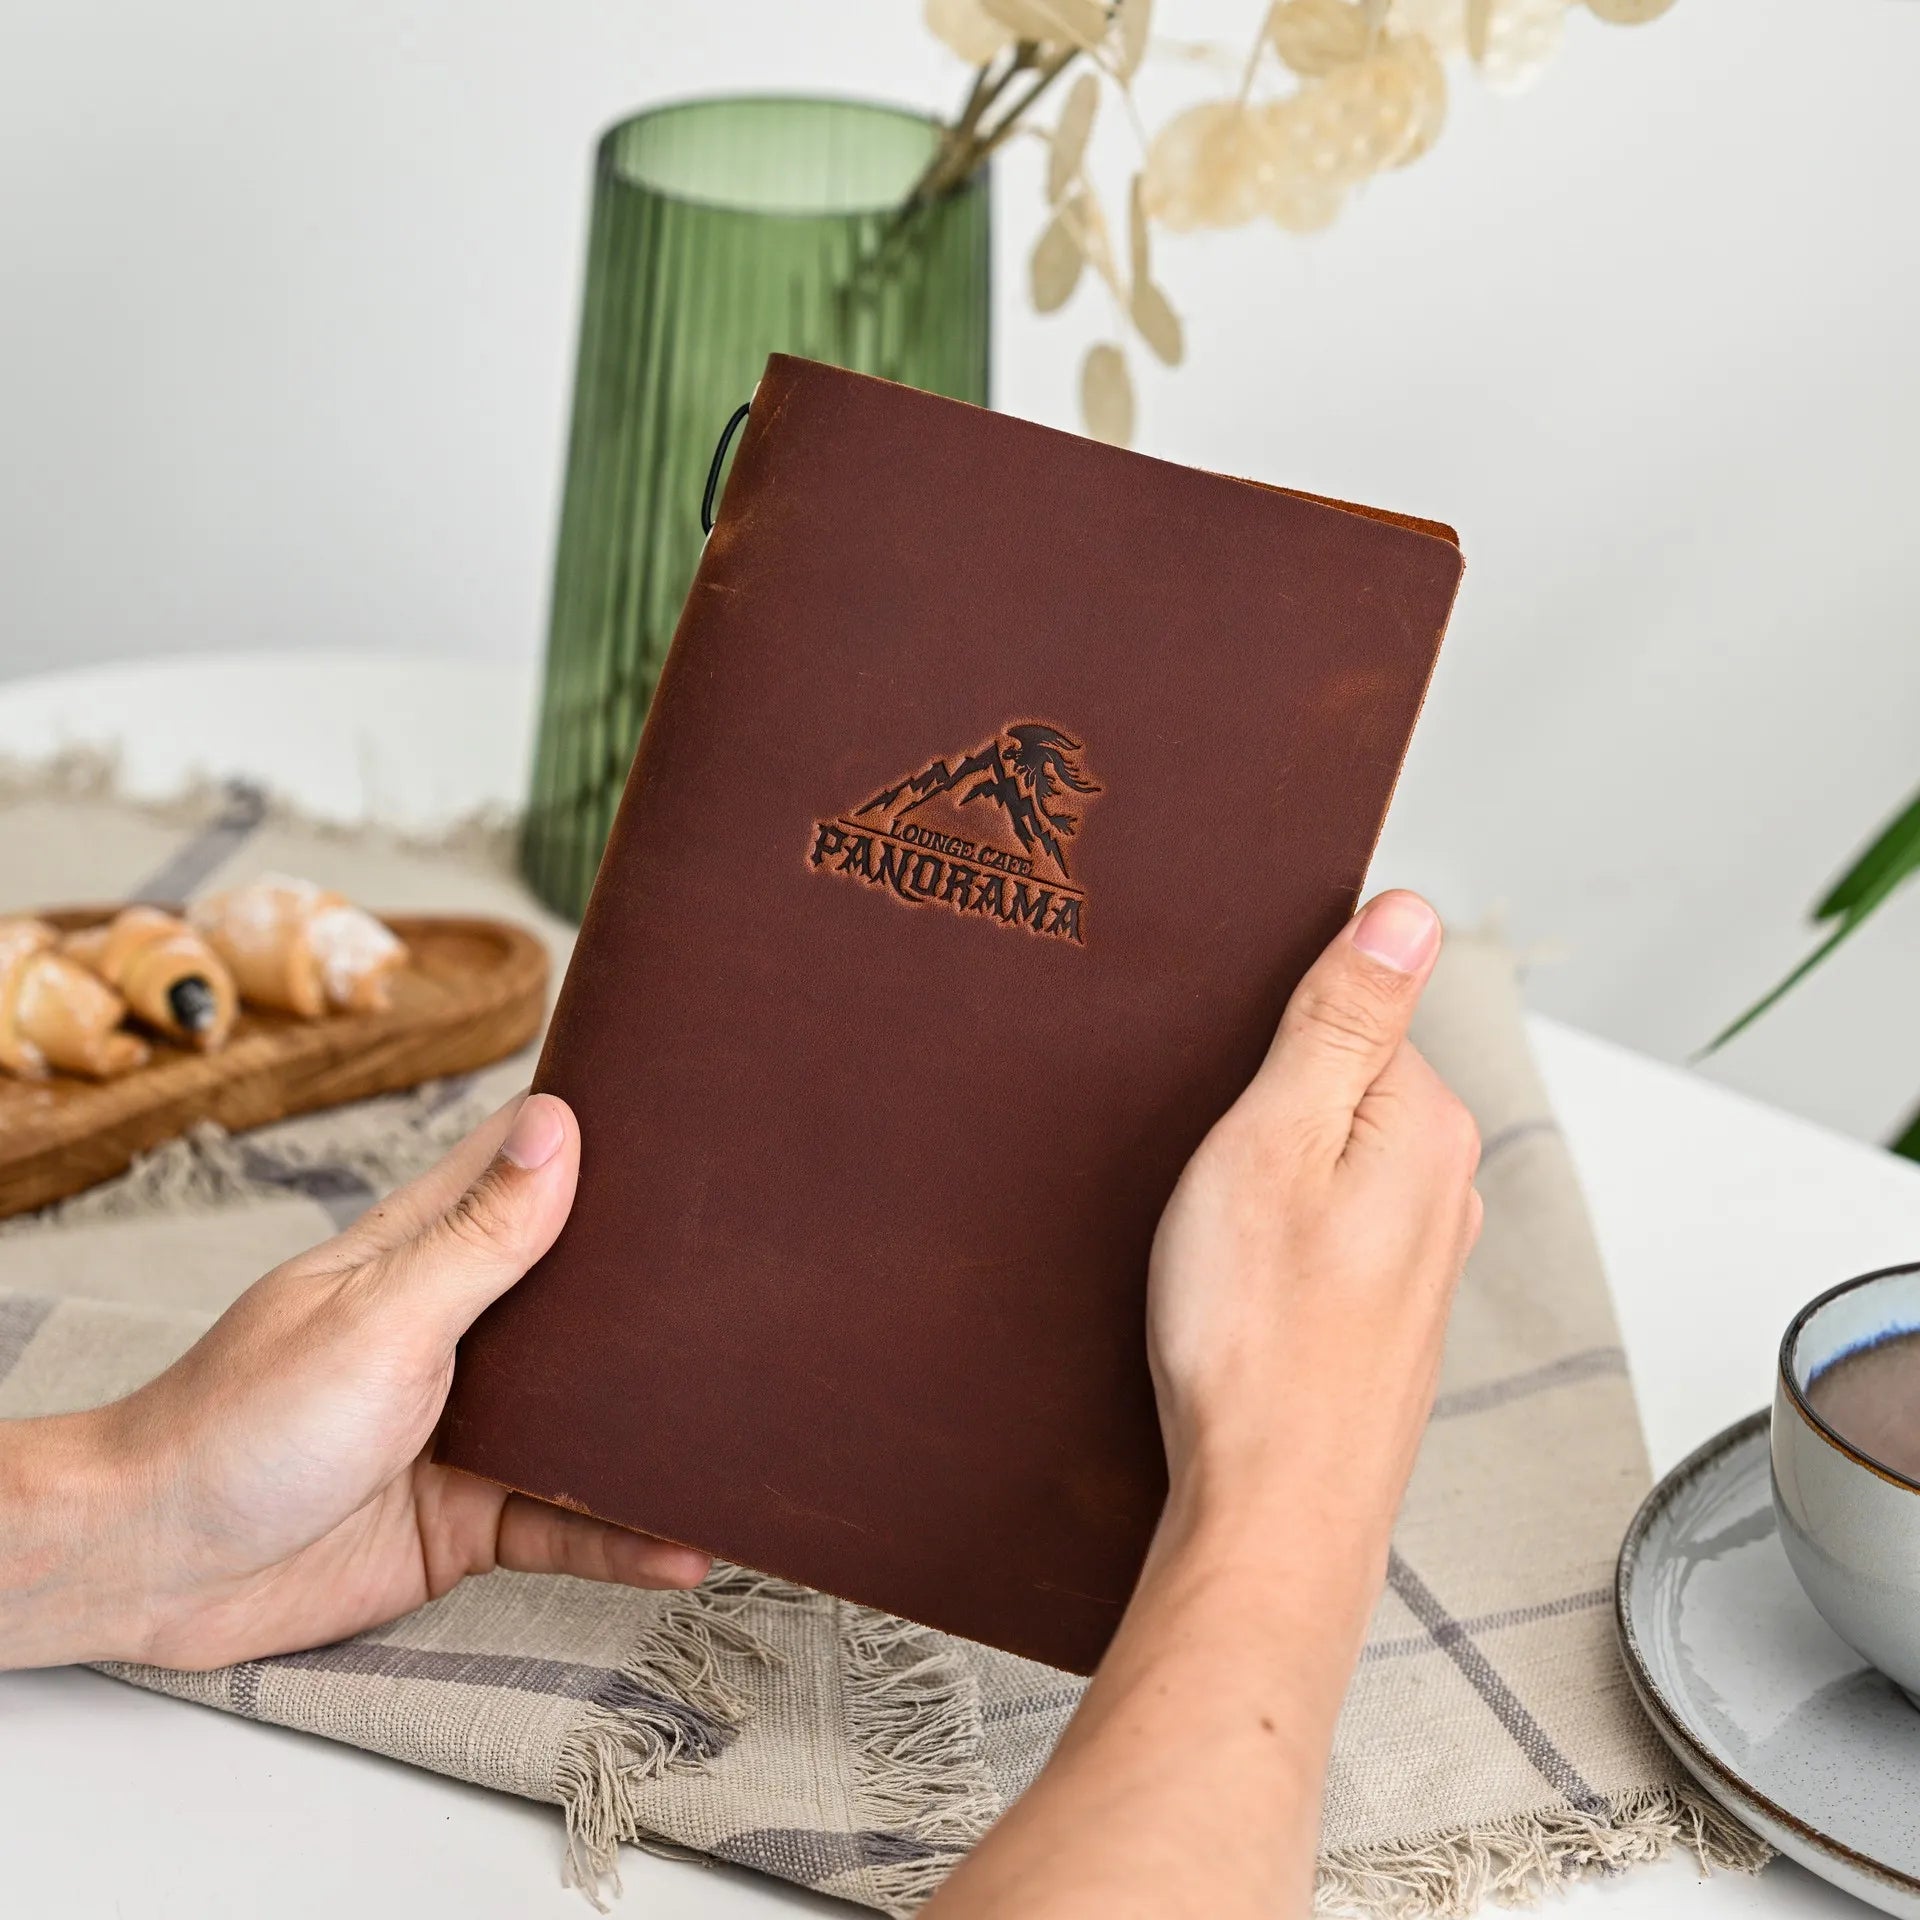 Our menu holder with an elastic band ensures your menus stay neat and in place, offering both style and practicality.